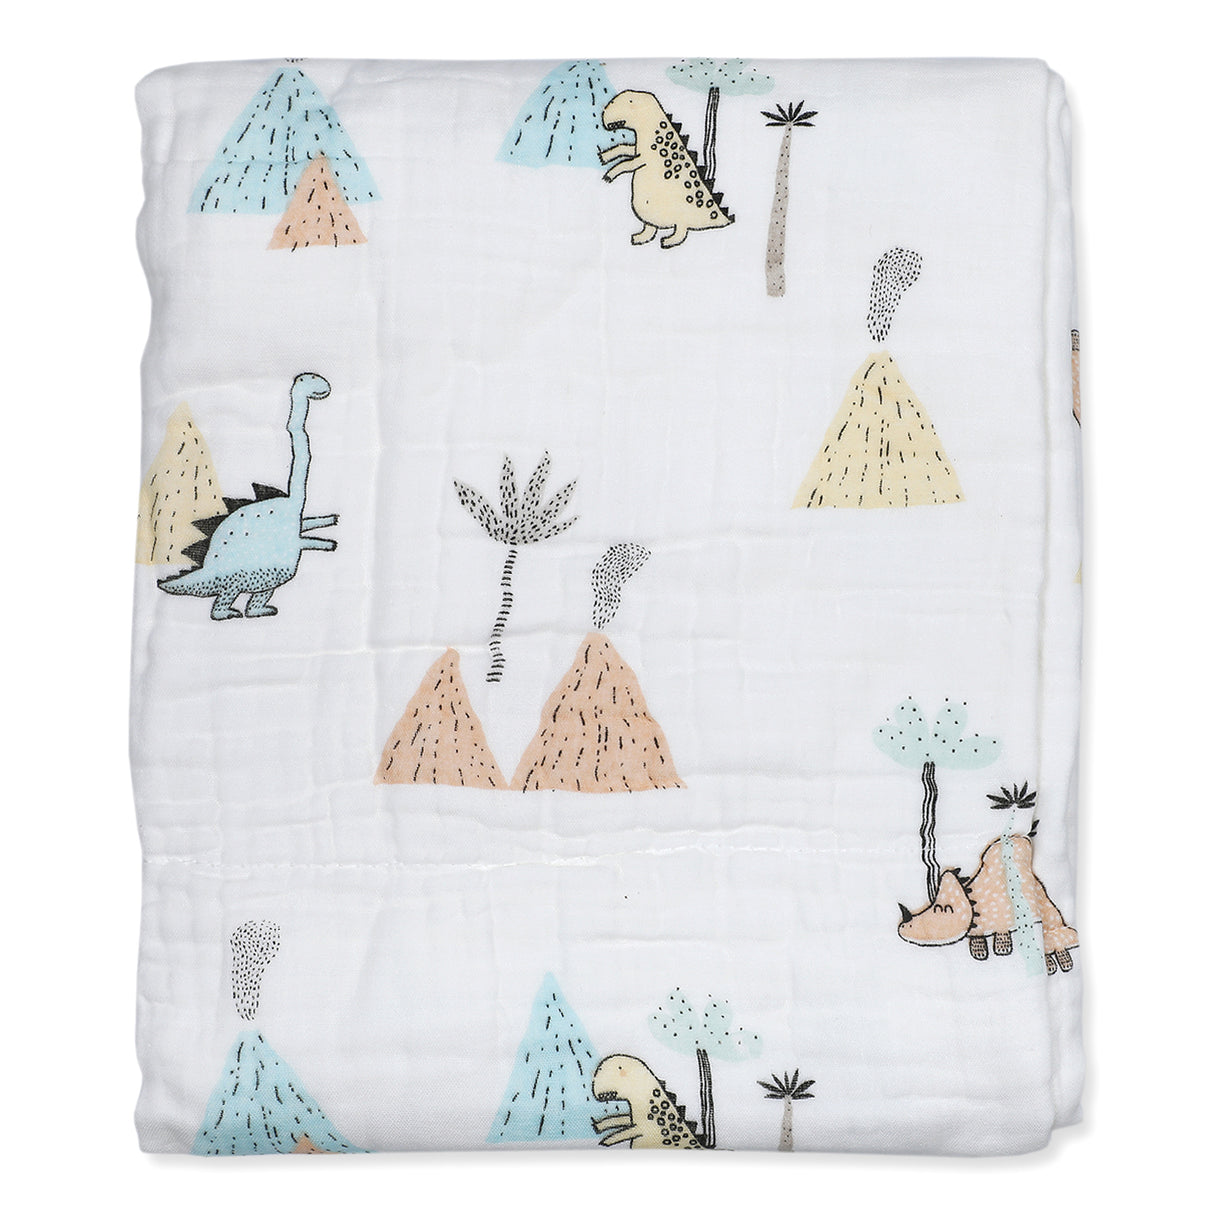 6 Layer  Soft And Comfort Muslin Blanket